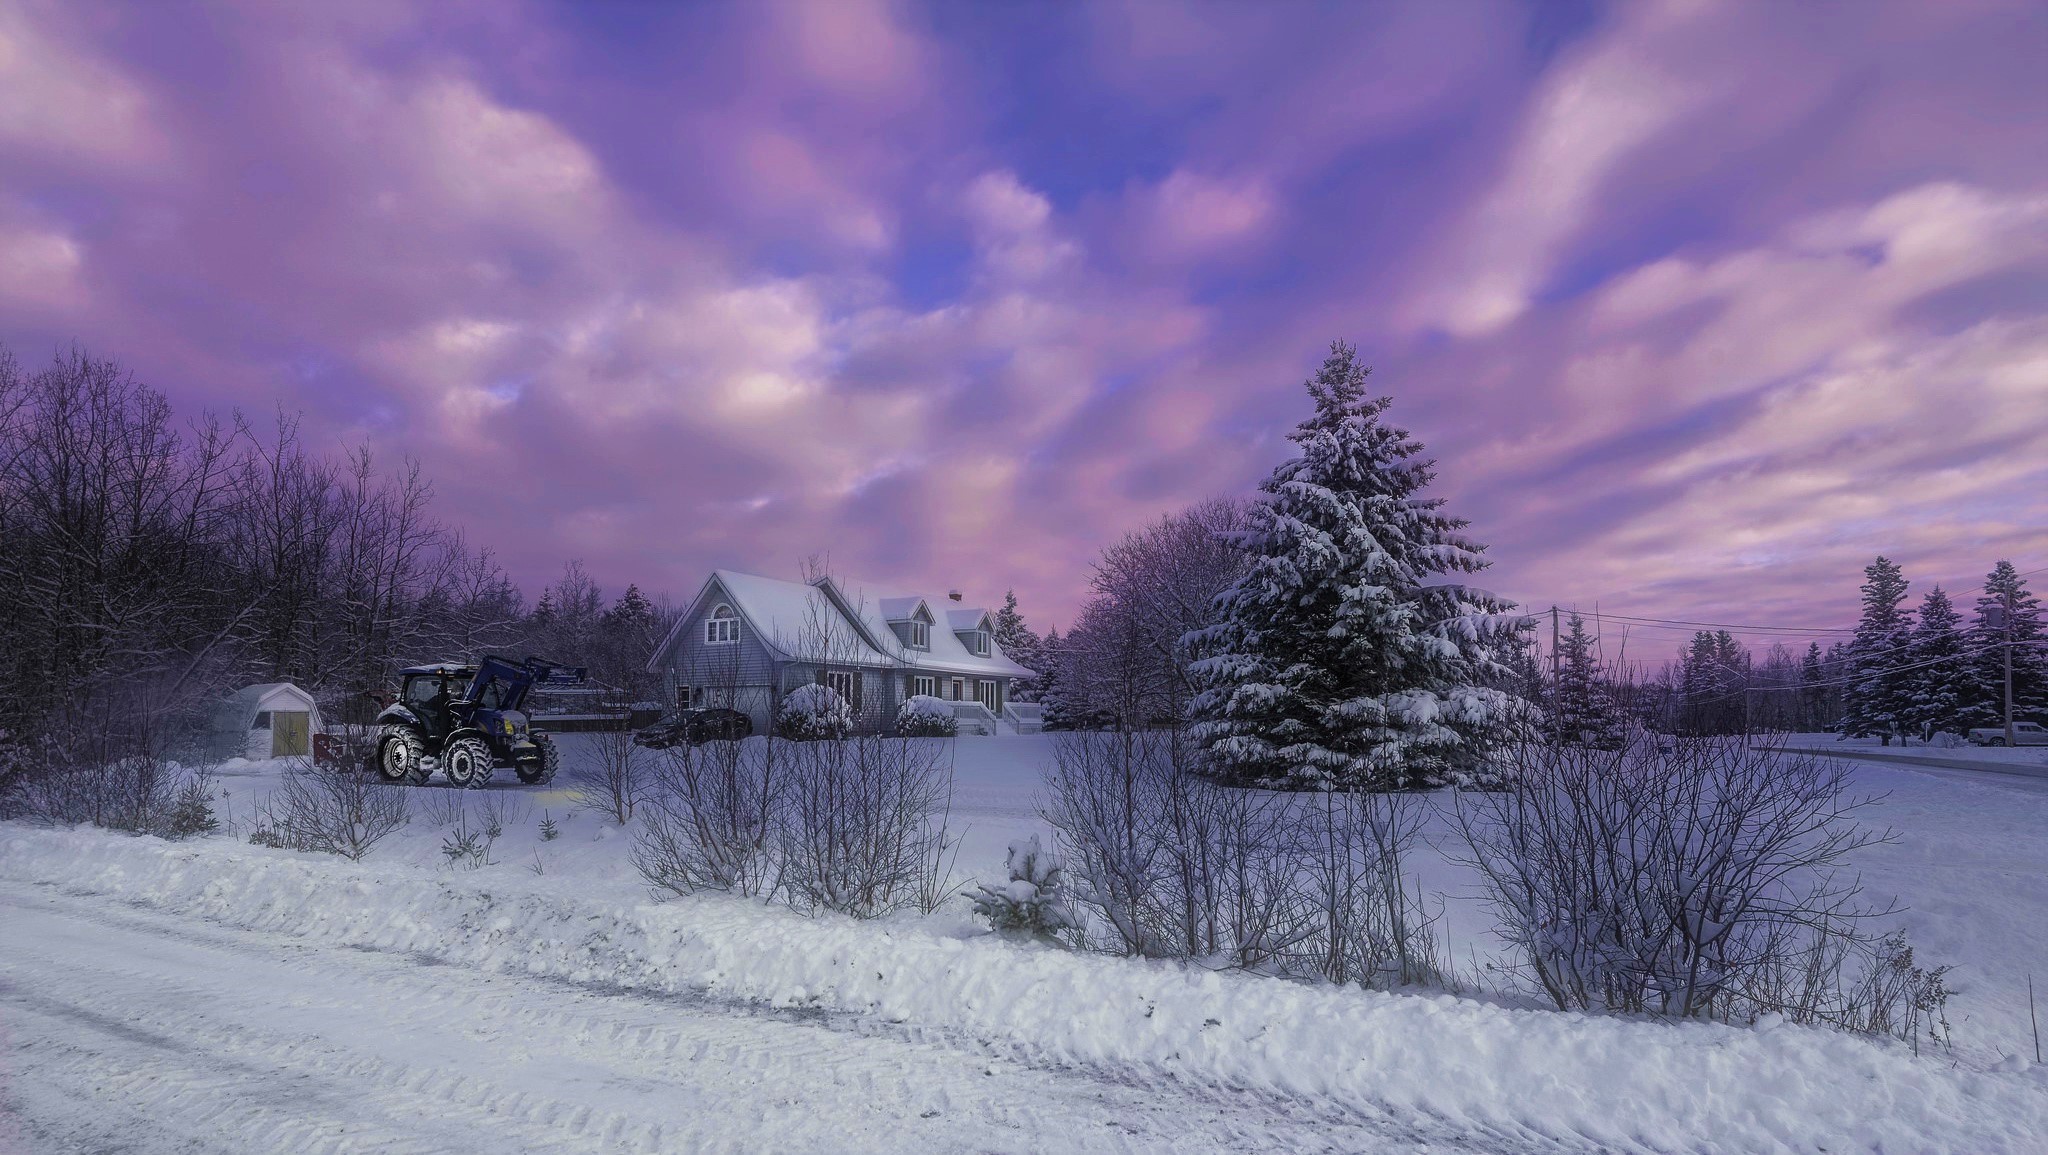 farm, tractor, photography, winter, cloud, country, house, purple, sky, snow, sunset, tree